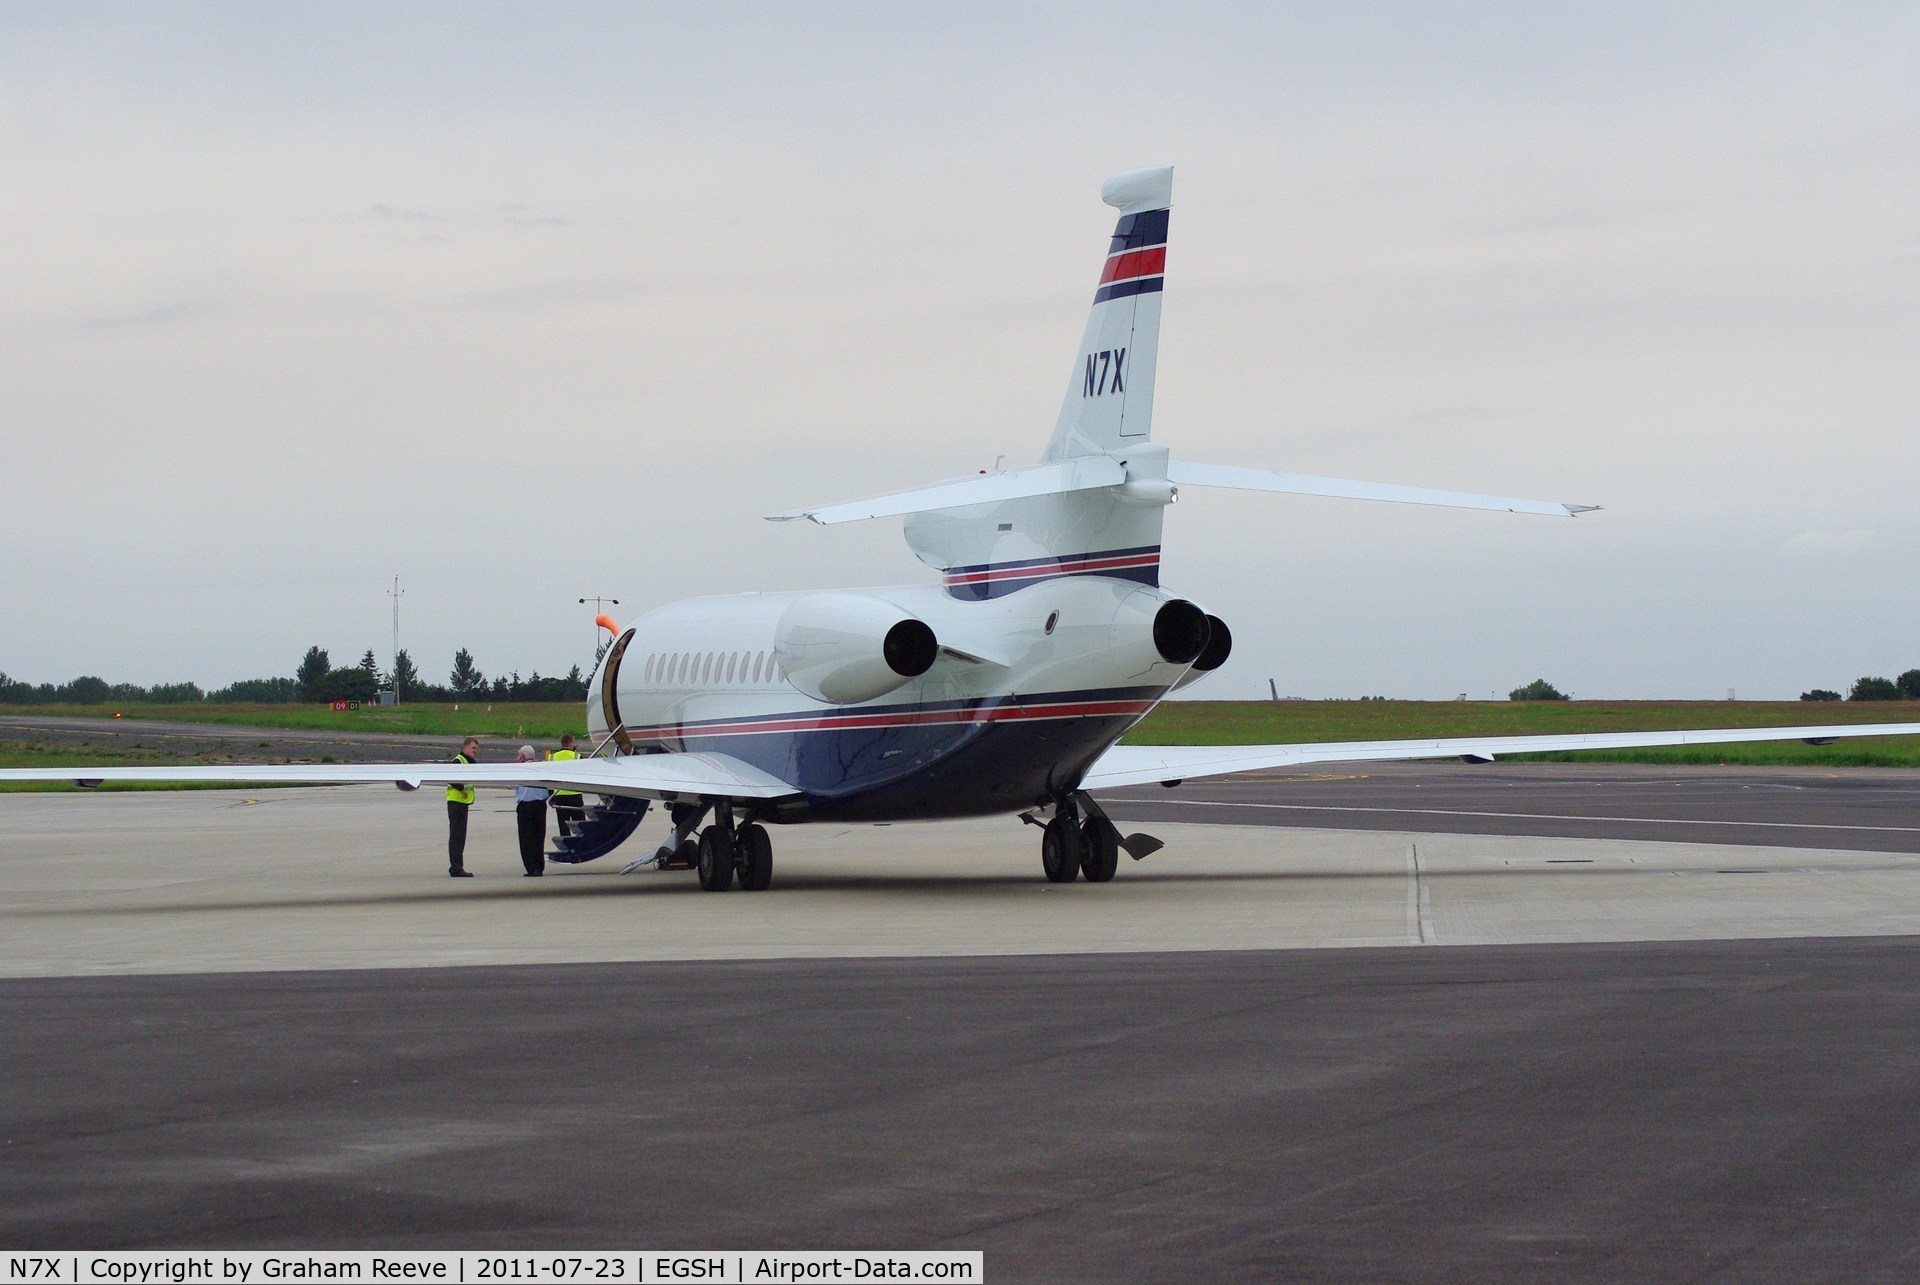 N7X, 2008 Dassault Falcon 7X C/N 33, Parked at Norwich.